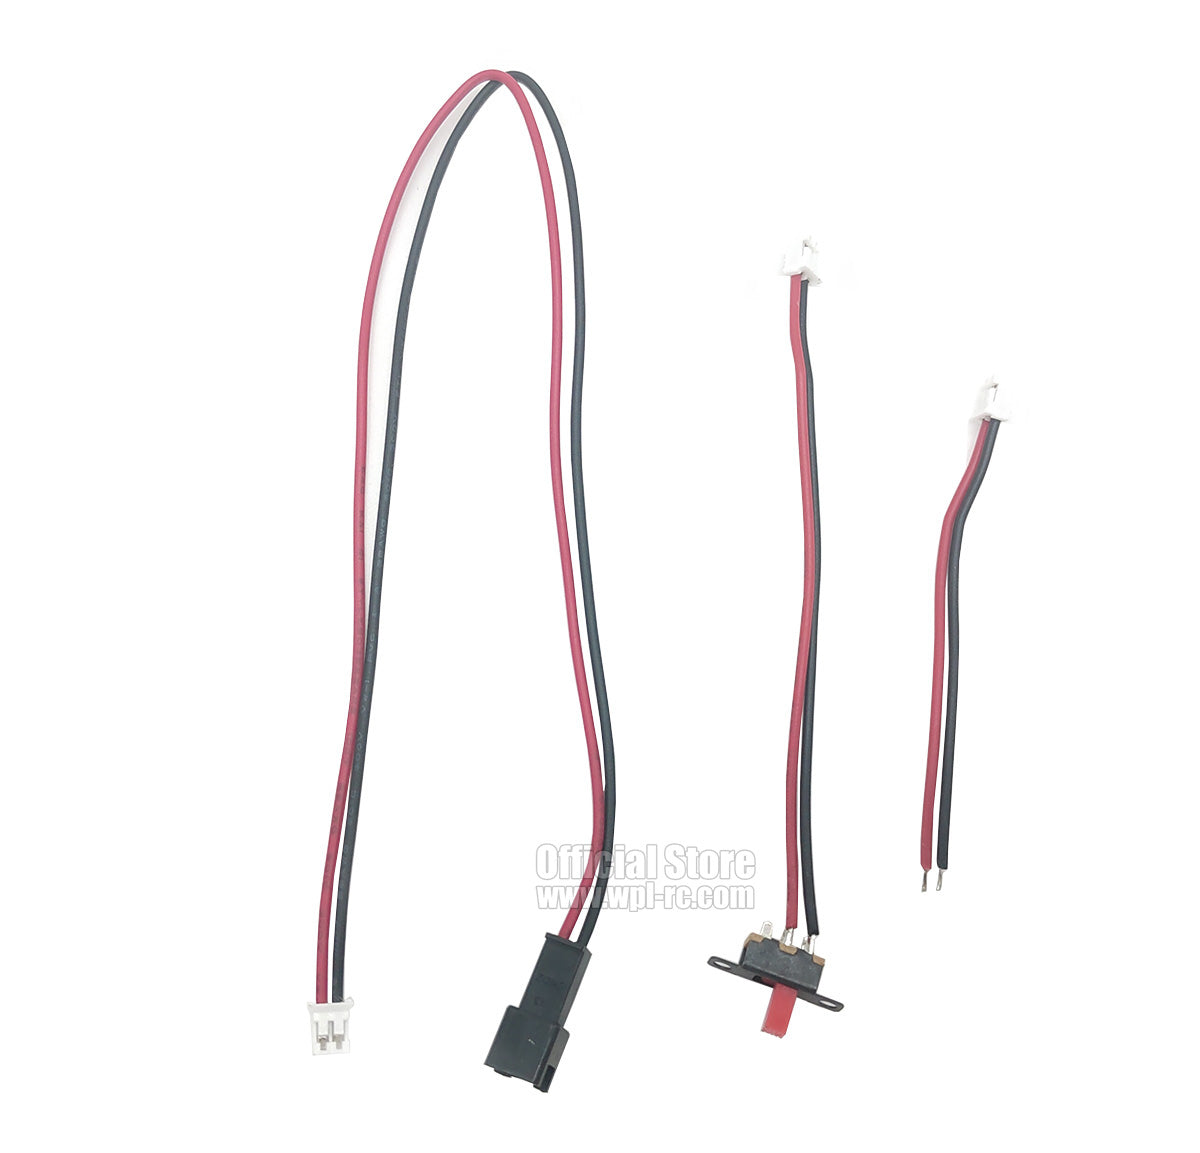 Long Battery Wires + Motor Wires + Switch for D12 & D42 Receiver - WPL RC Official Store